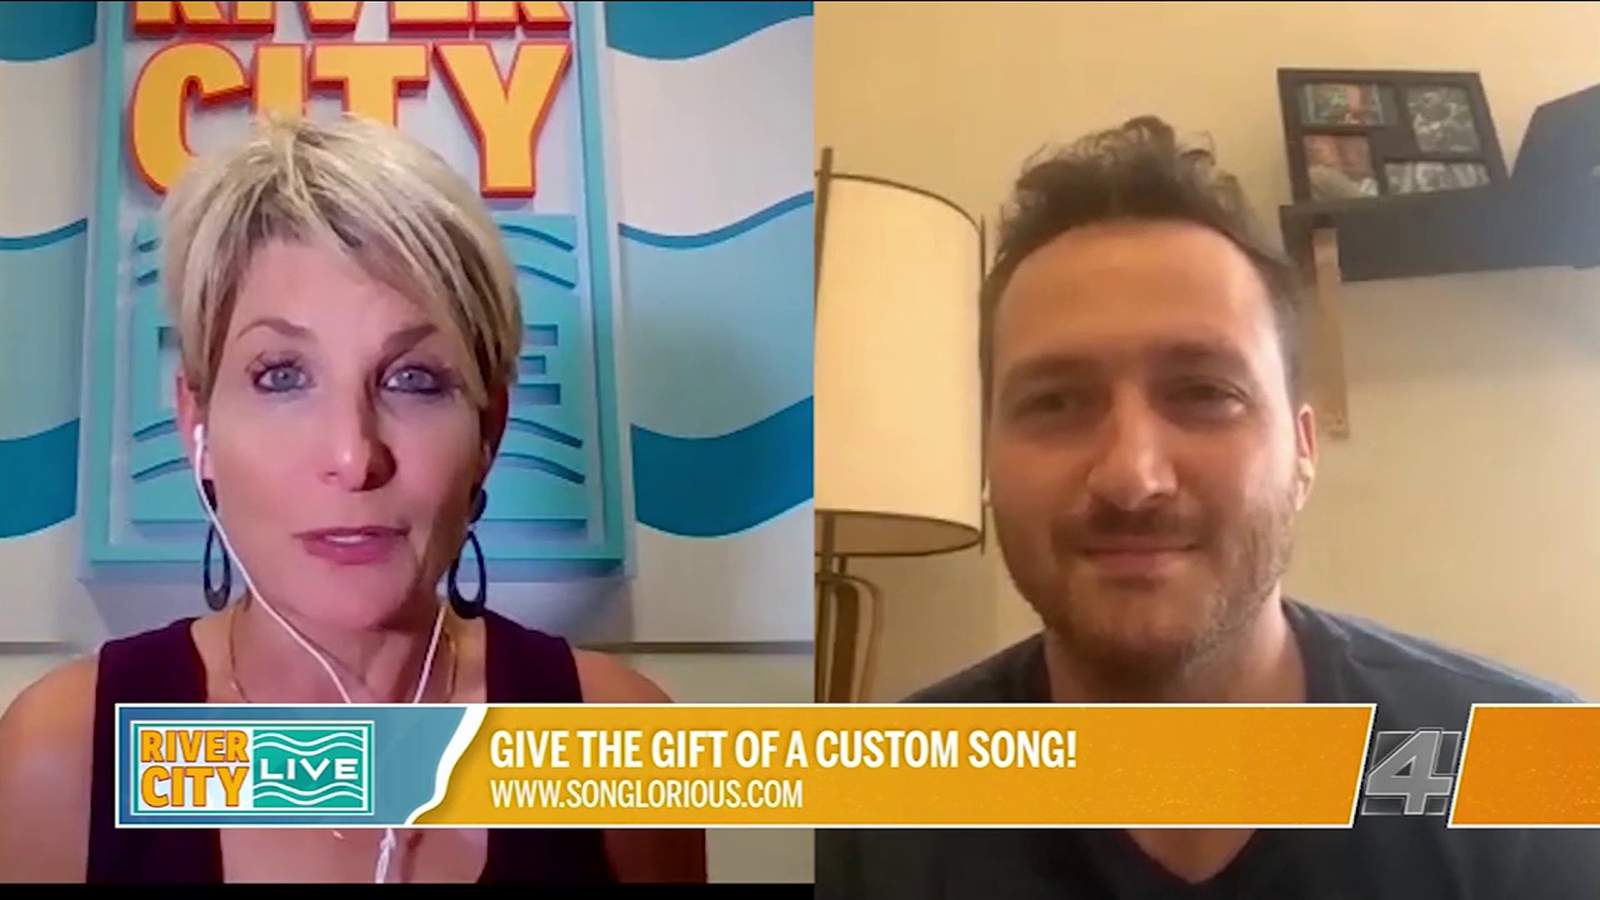 Give The Gift Of A Custom Song | River City Live